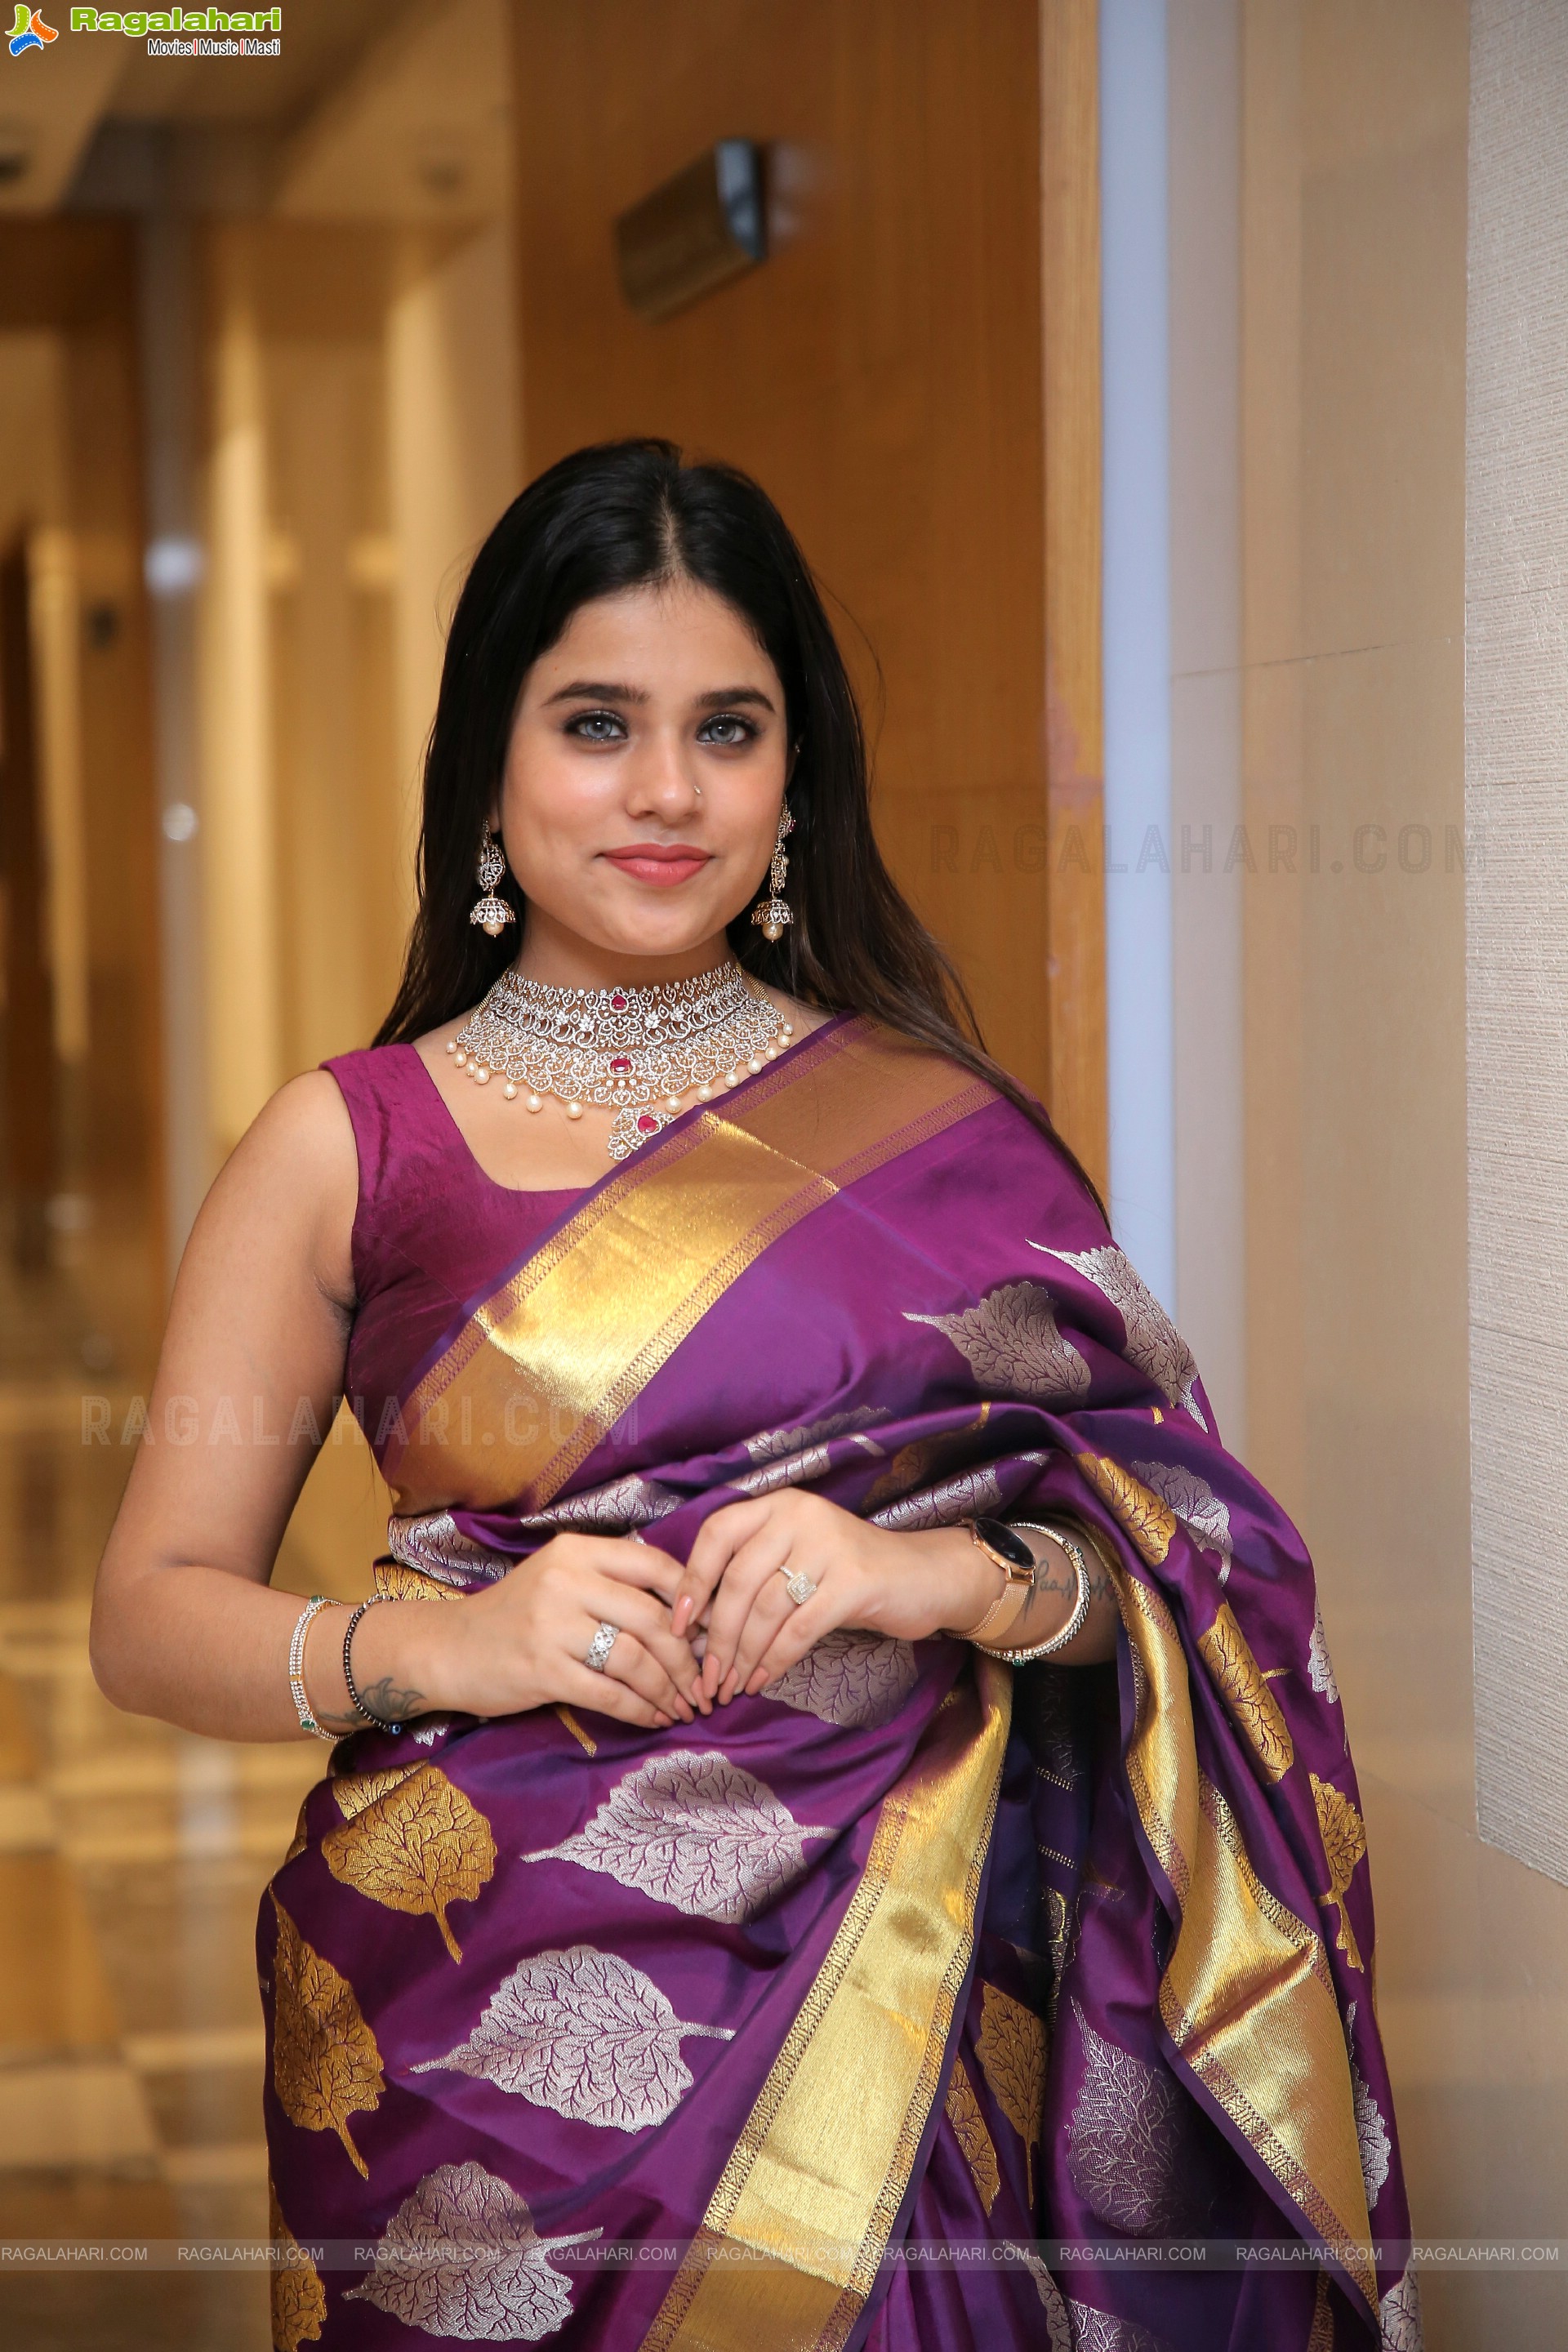 Meenal Juneja Poses With Jewellery, HD Photo Gallery